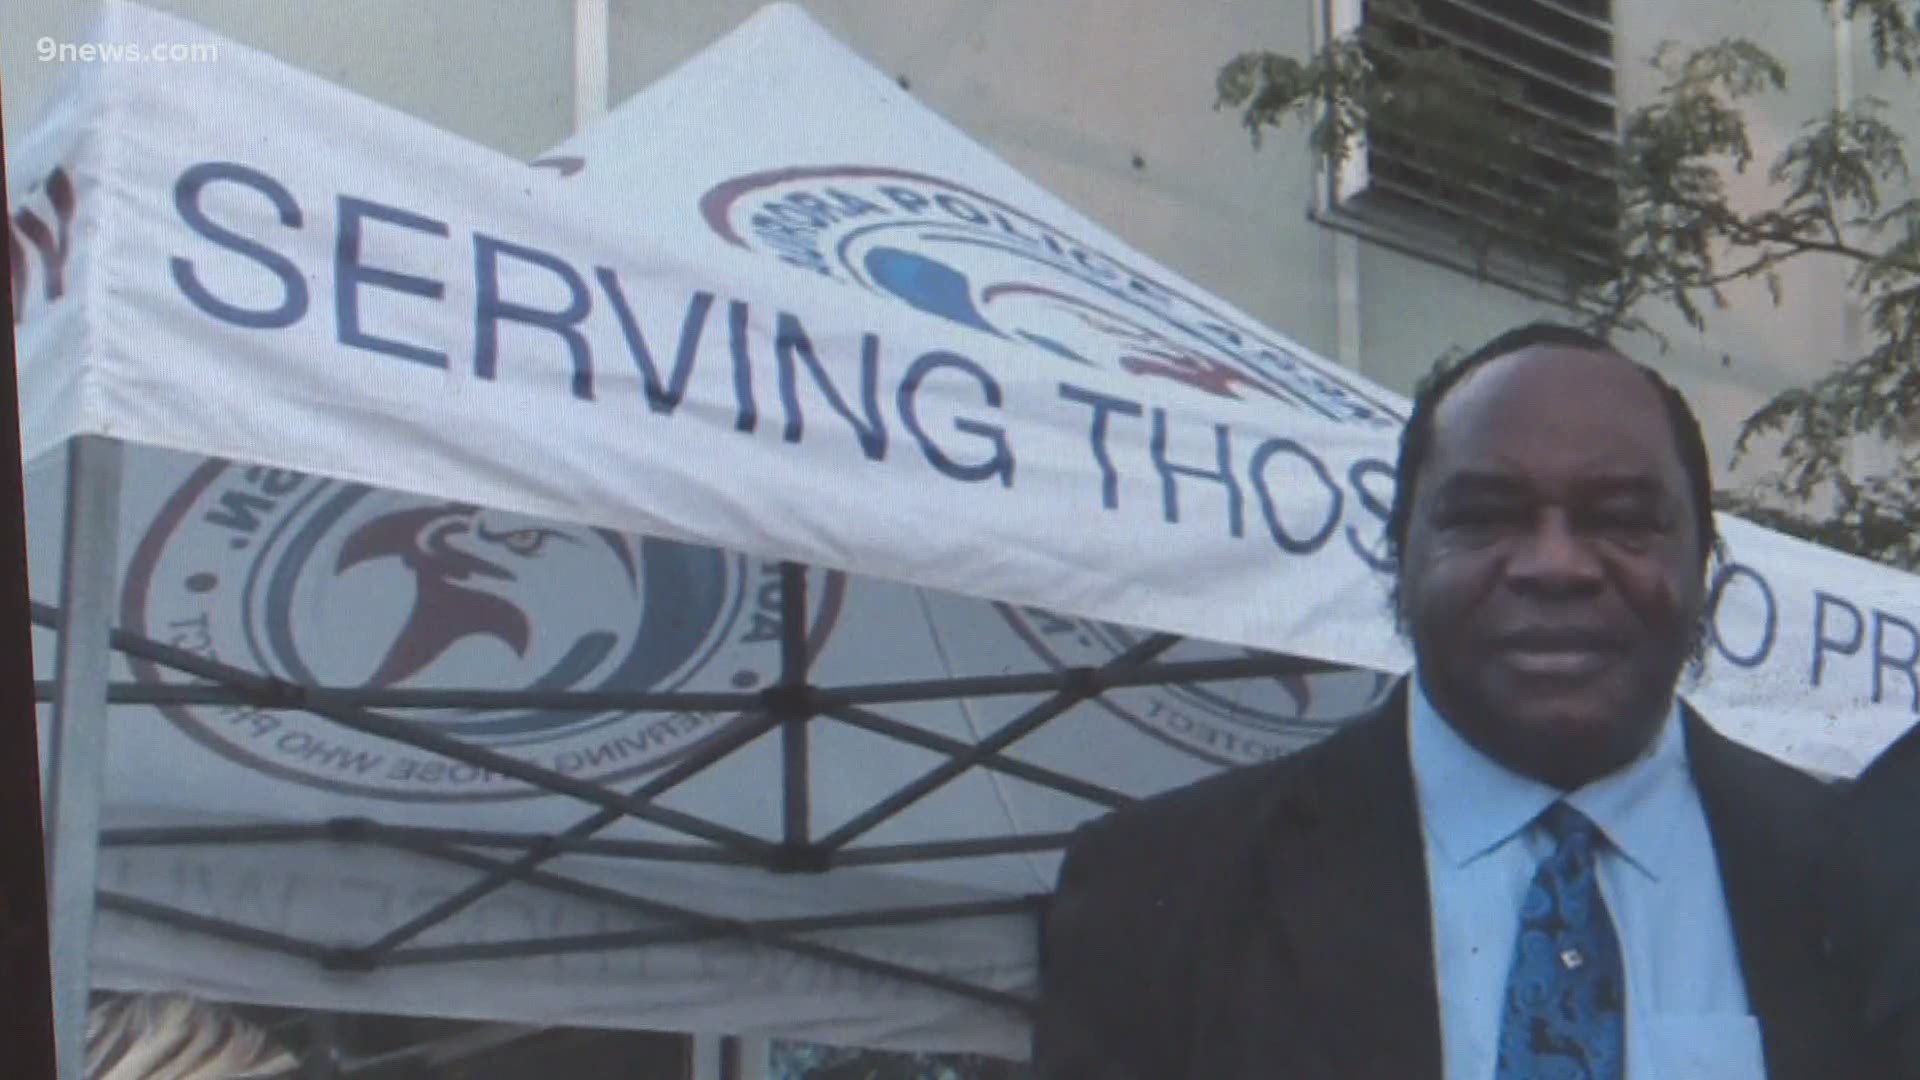 Involved in several community programs, Rev. Milton Thomas was considered a friend of the Aurora Police Department.